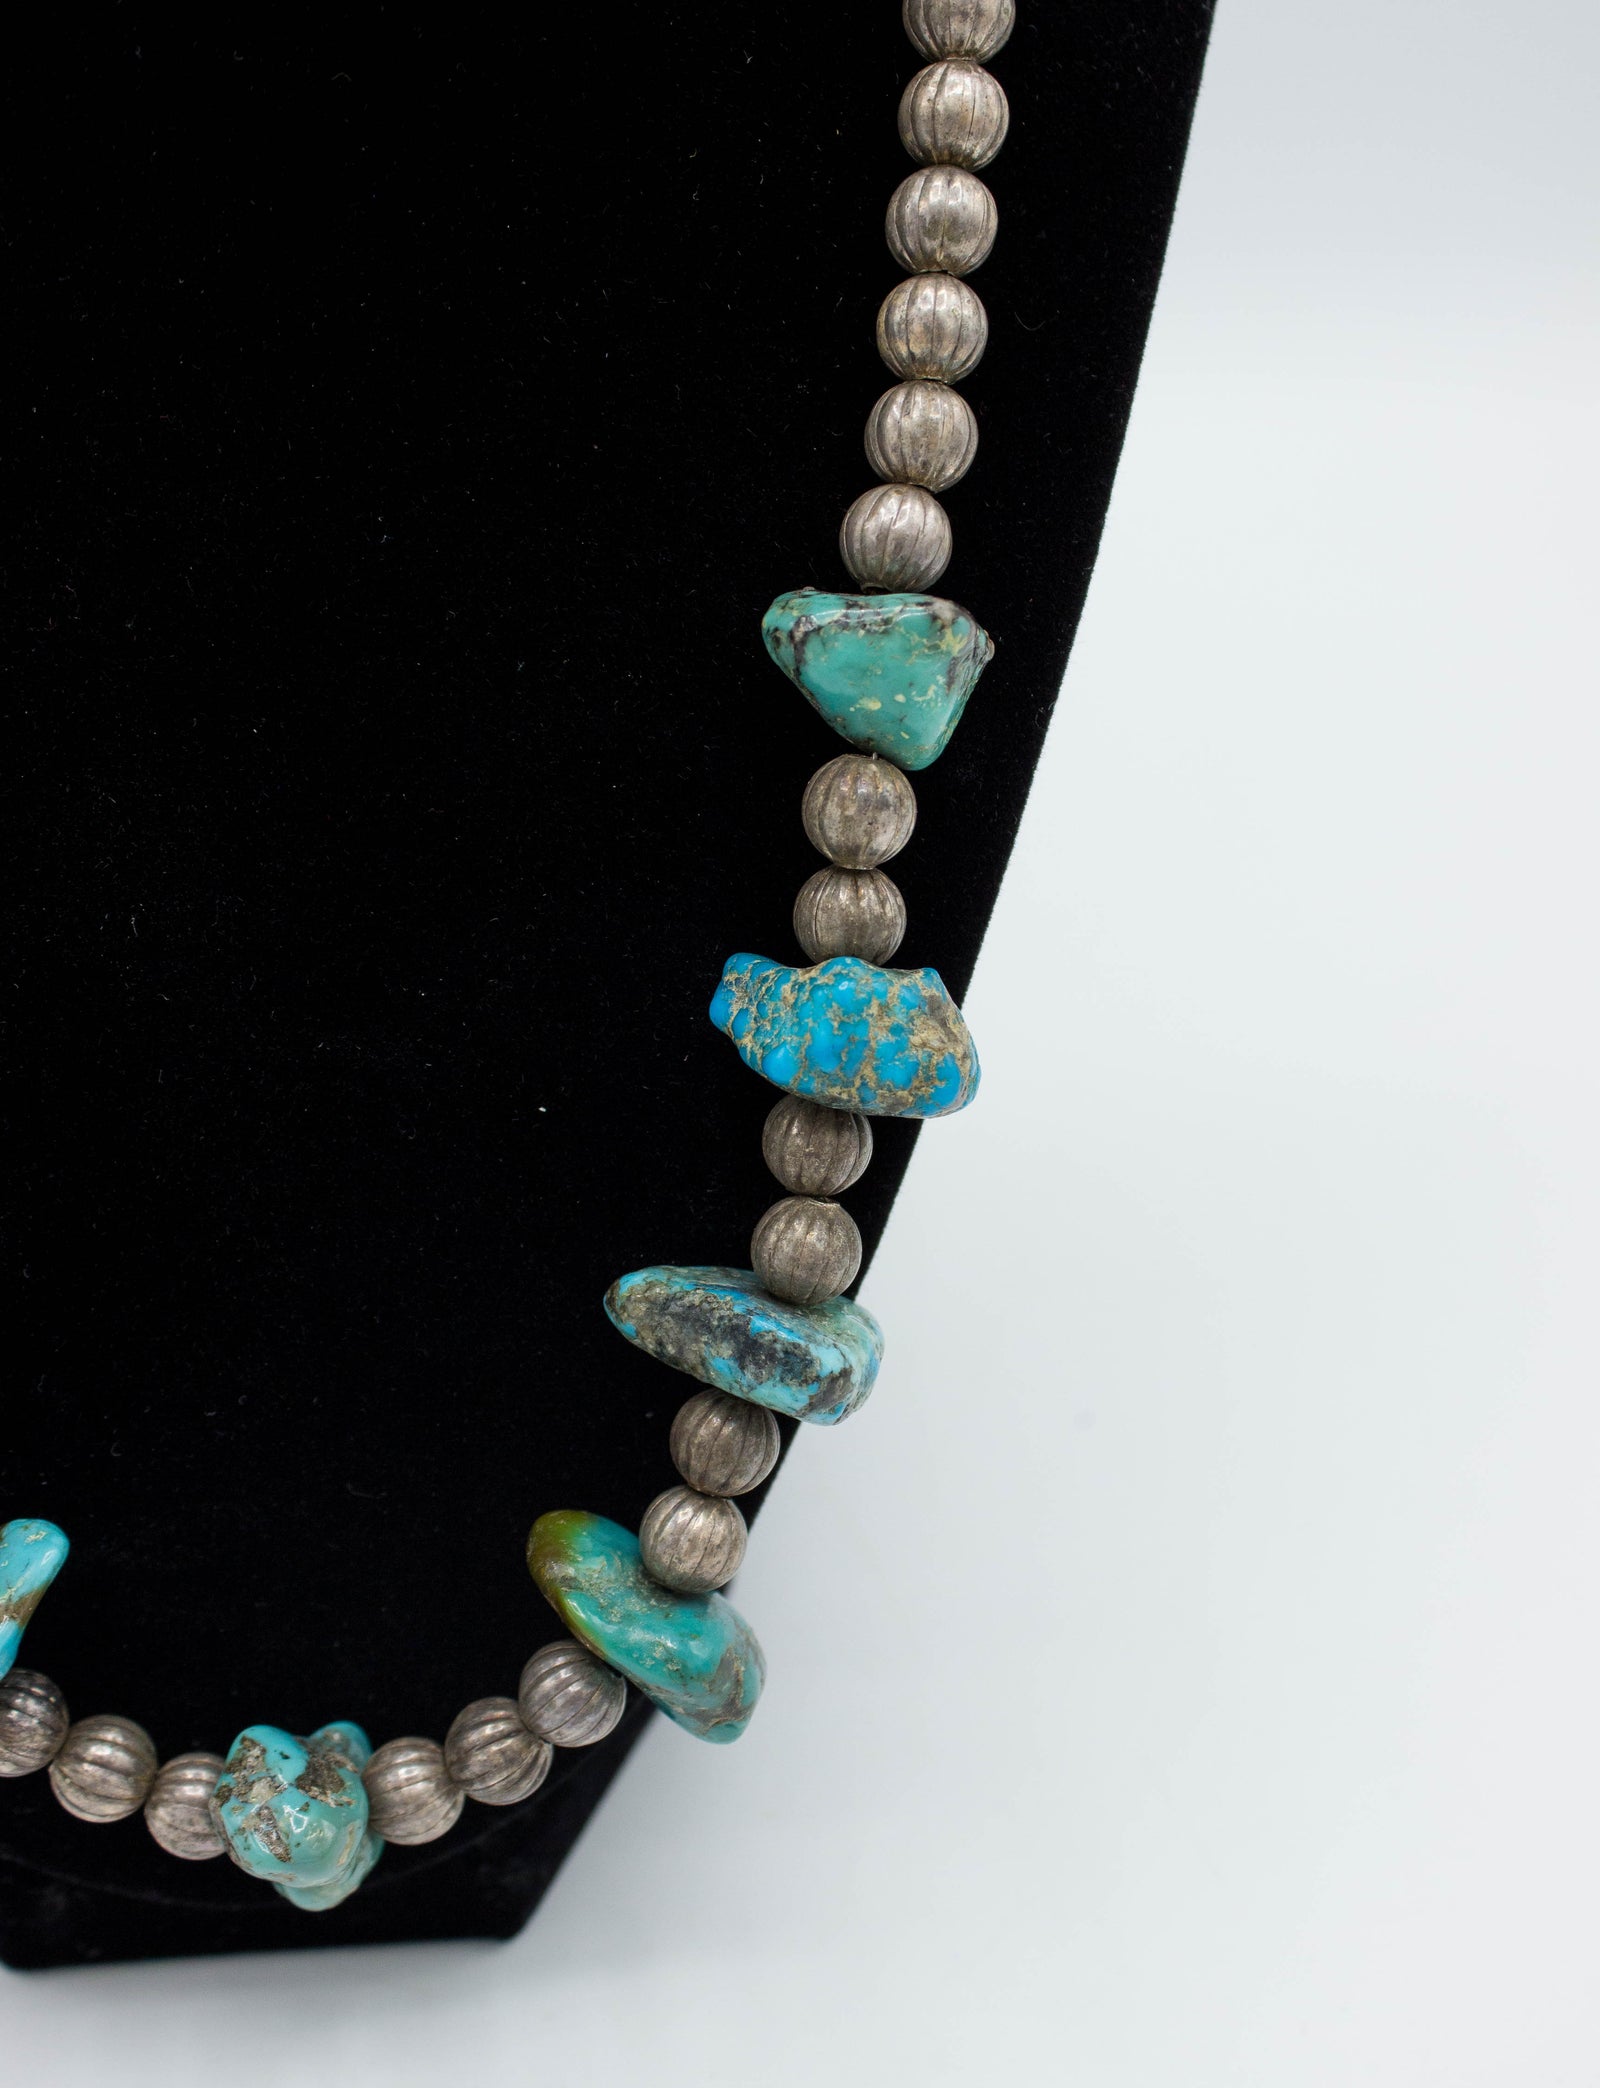 Vintage 60s Sterling Silver Pearls and Turquoise Nugget Necklace